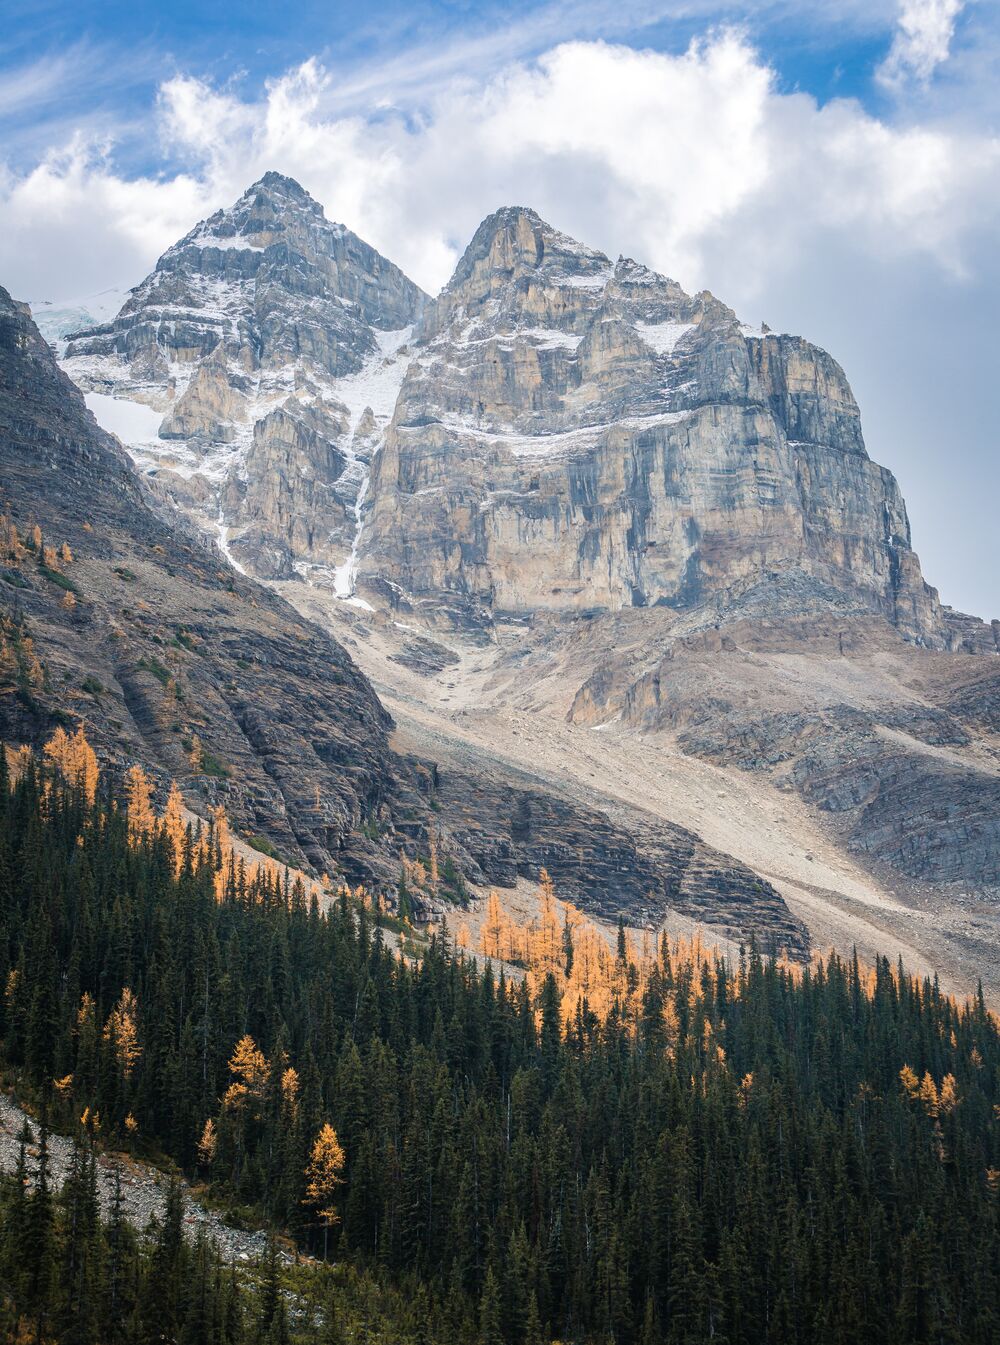 Larch trees at Lake Louise with a mountain in the background in Banff National Park.